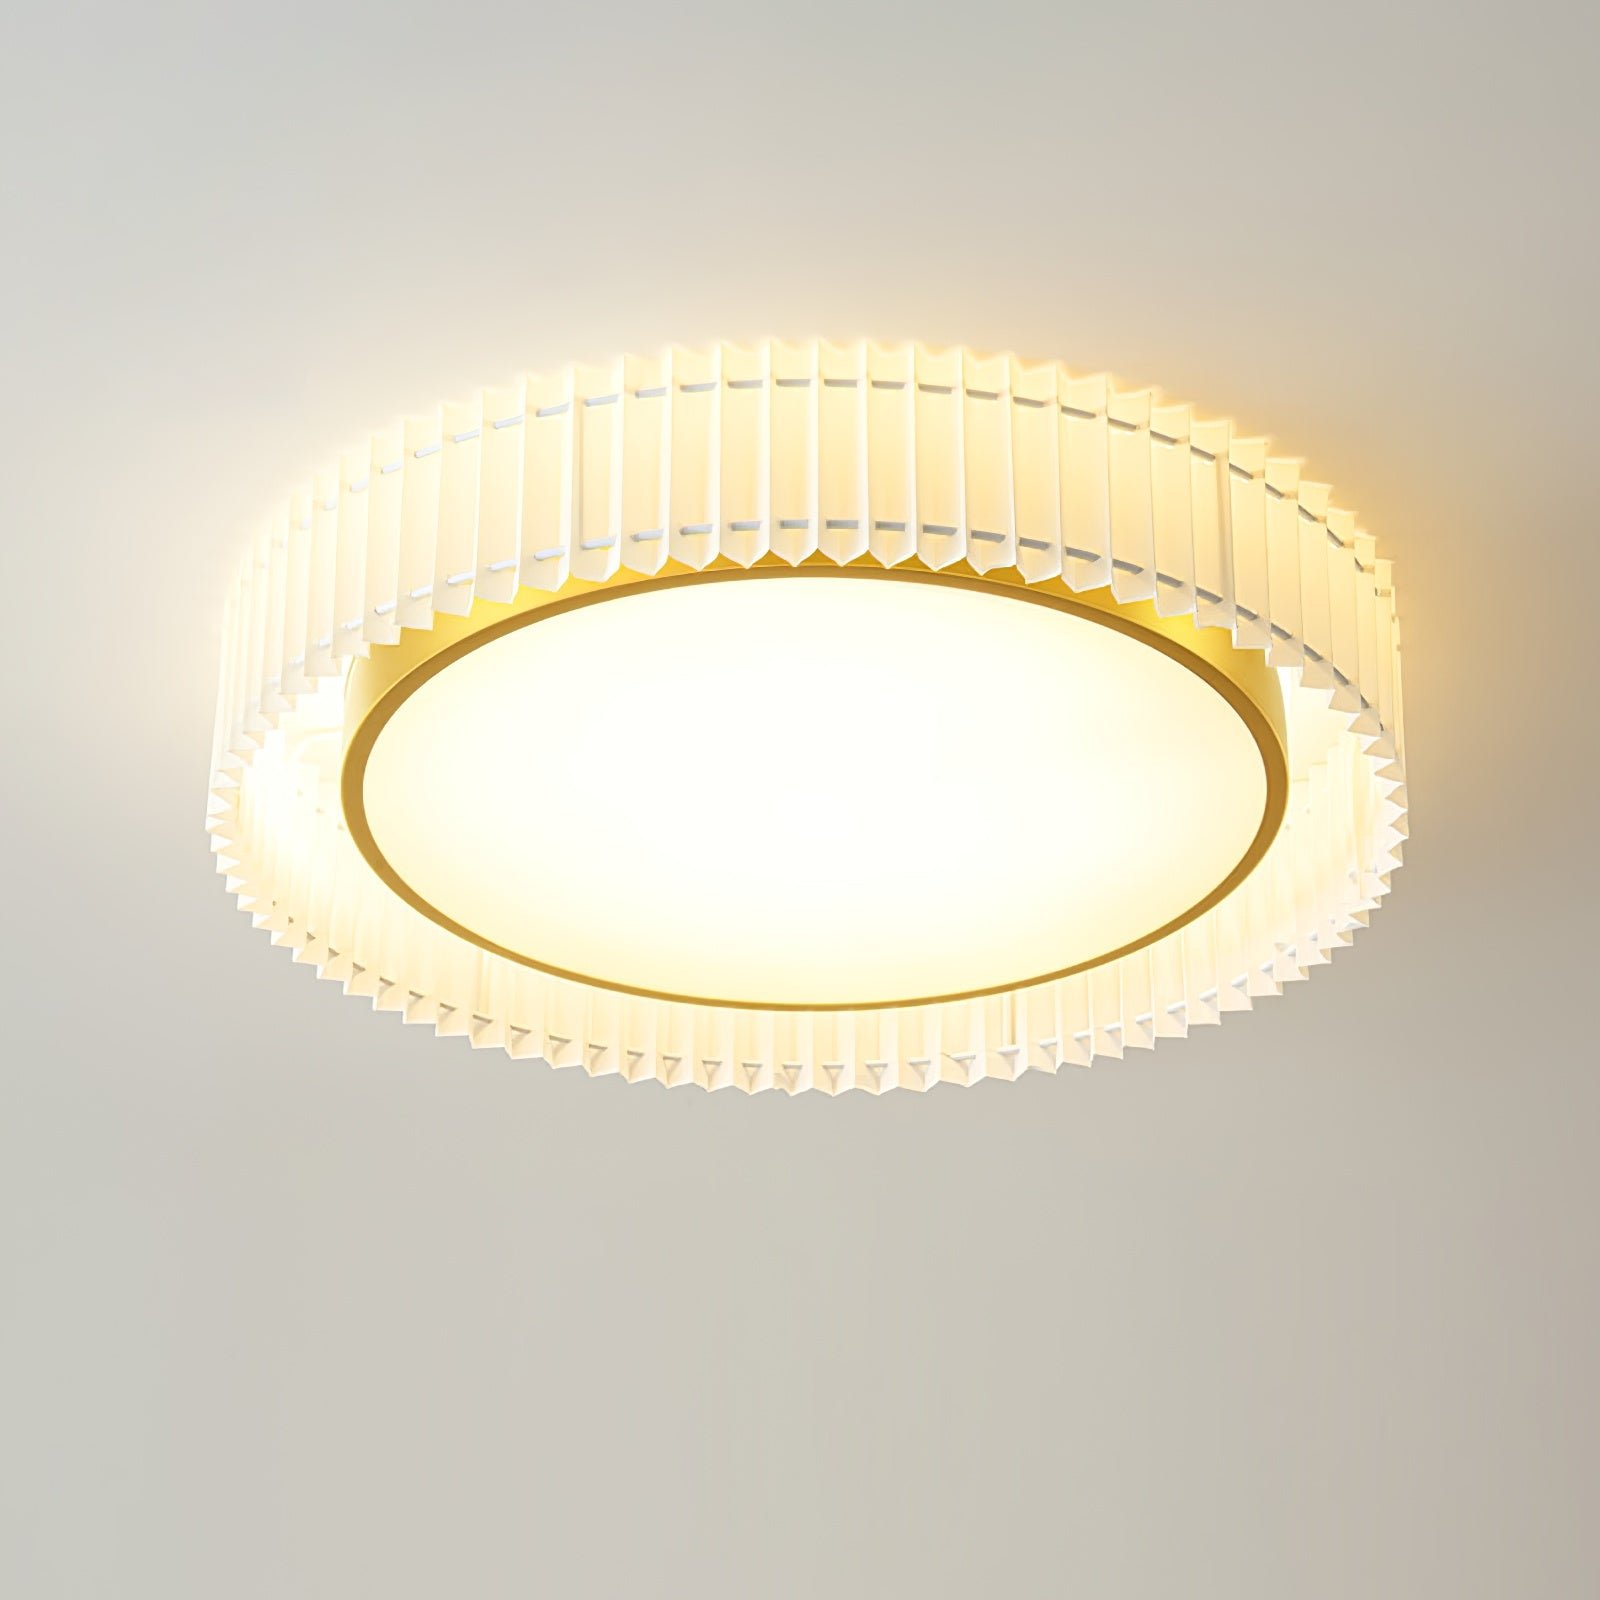 Round Pleated Ceiling Lamp in Gold Beige, Cool White - Diameter 23.6 inches x Height 7.8 inches (60cm x 20cm)